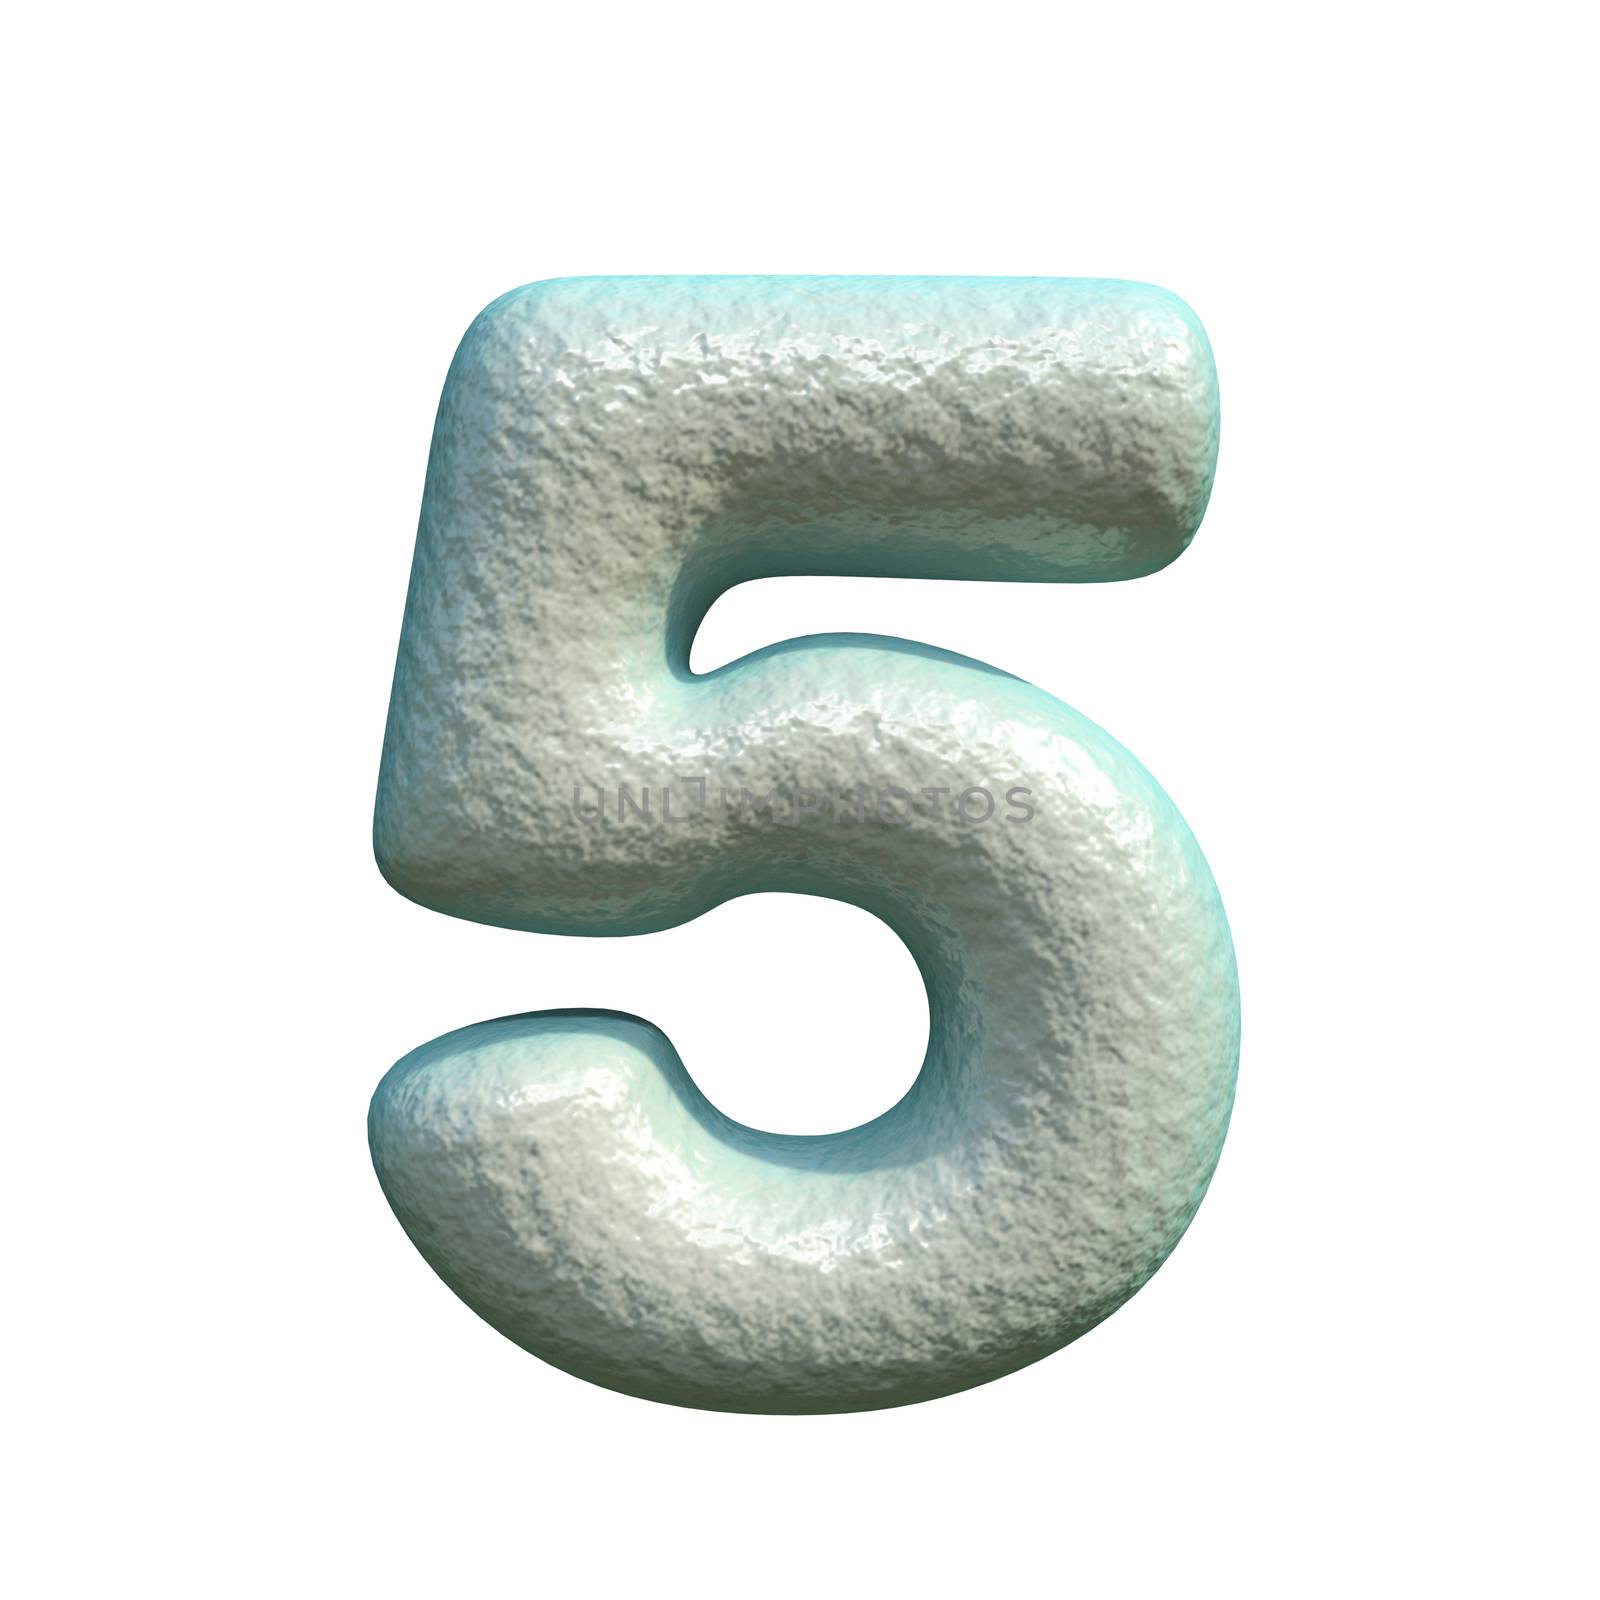 Grey blue clay Number 5 FIVE 3D rendering illustration isolated on white background